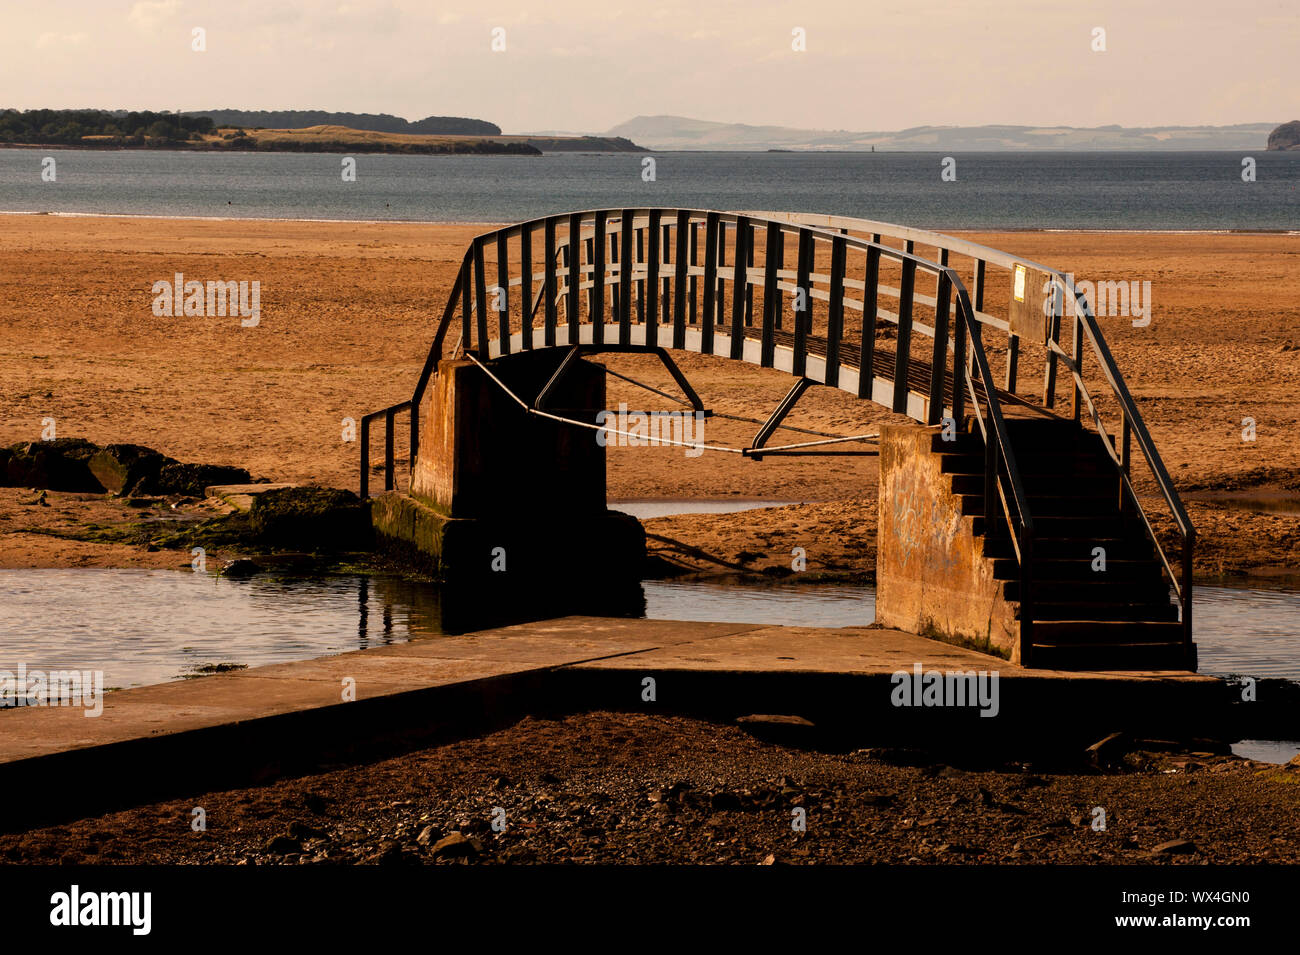 Belhaven bridge or 'Bridge to nowhere' in Belhaven bay. Dunbar is a town located in the south-east of Scotland. Stock Photo